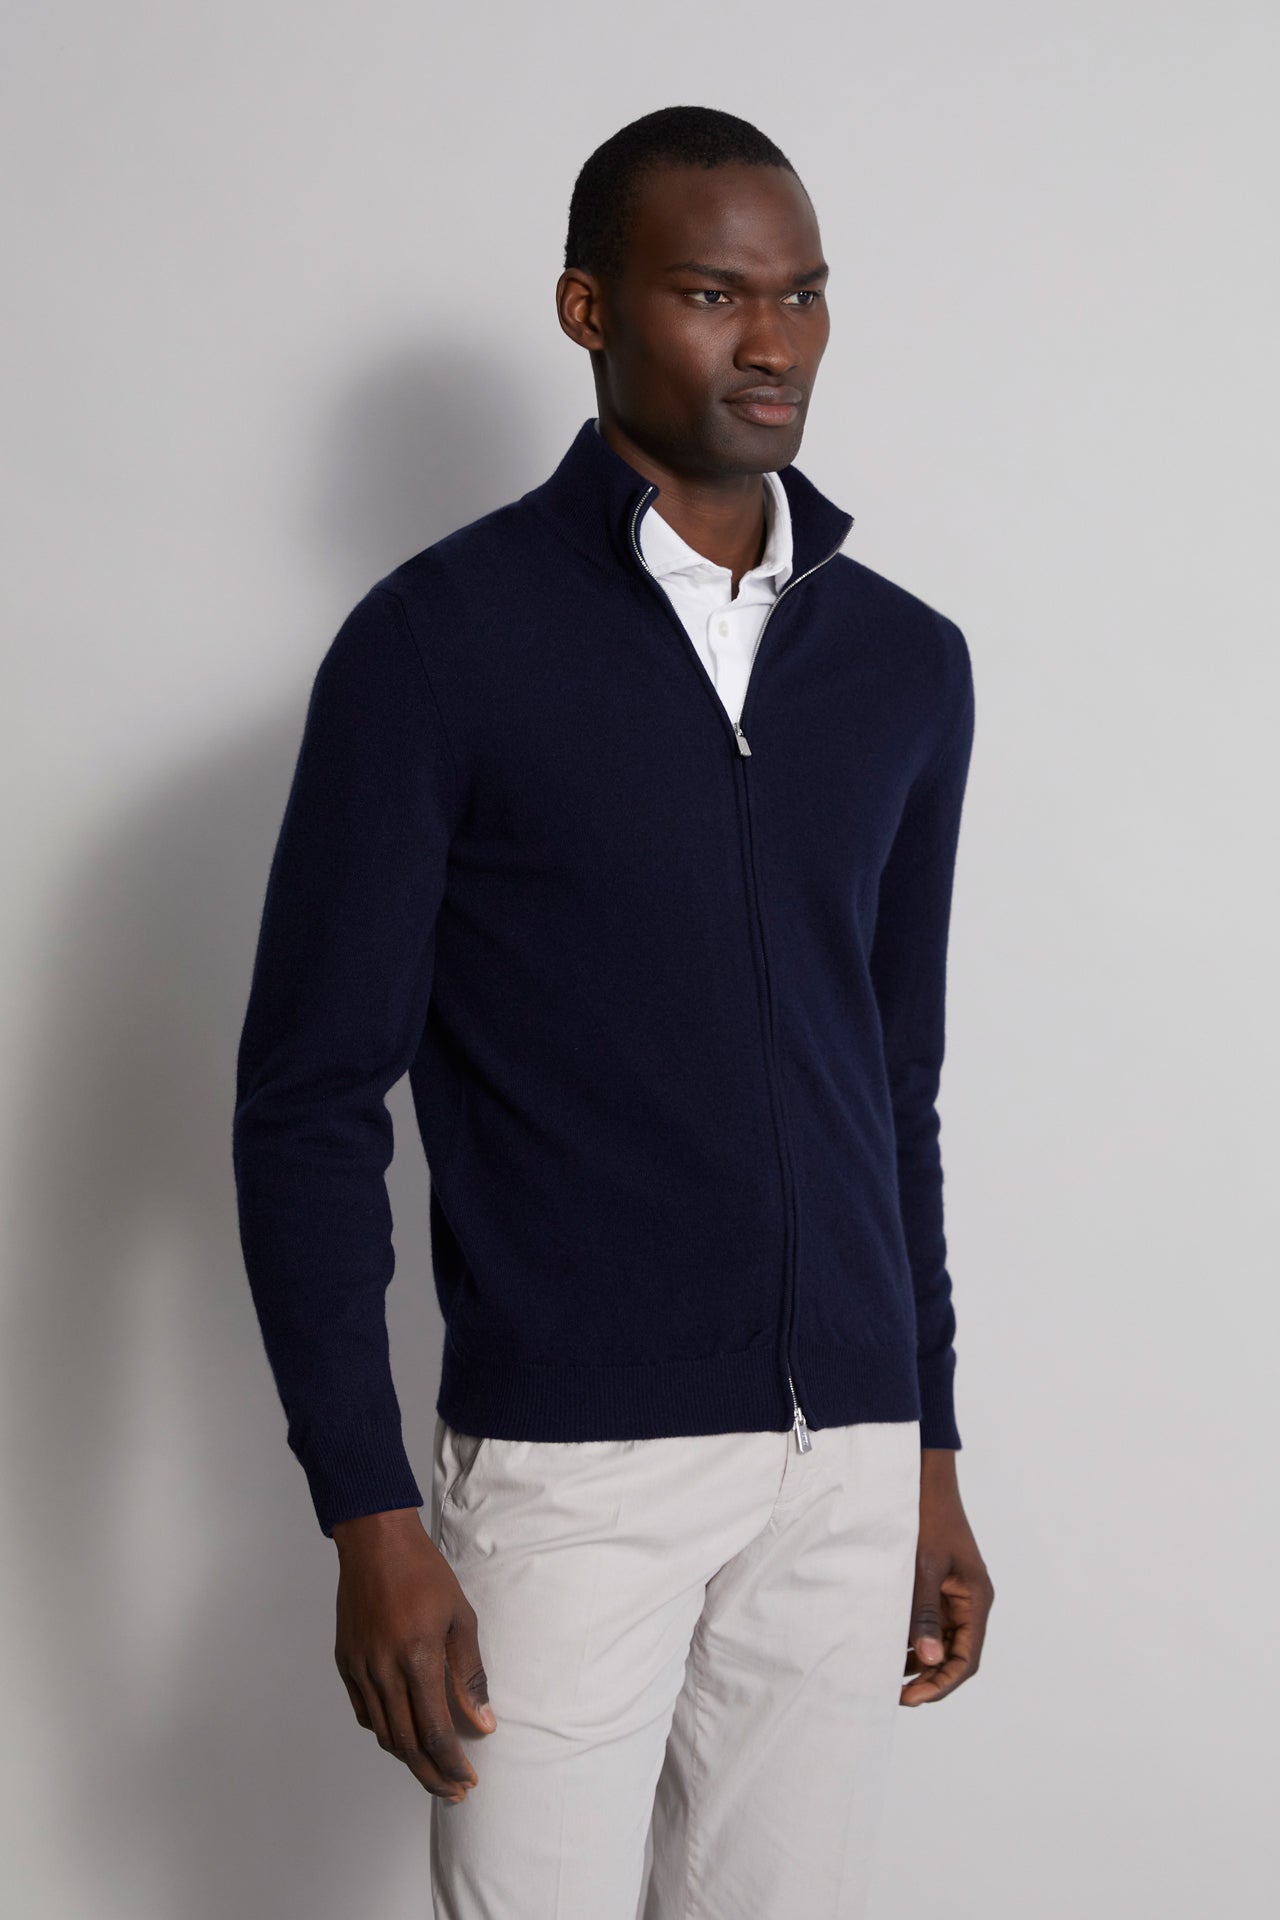 Favonio Open full-zipped cashmere sweater in iconic colors